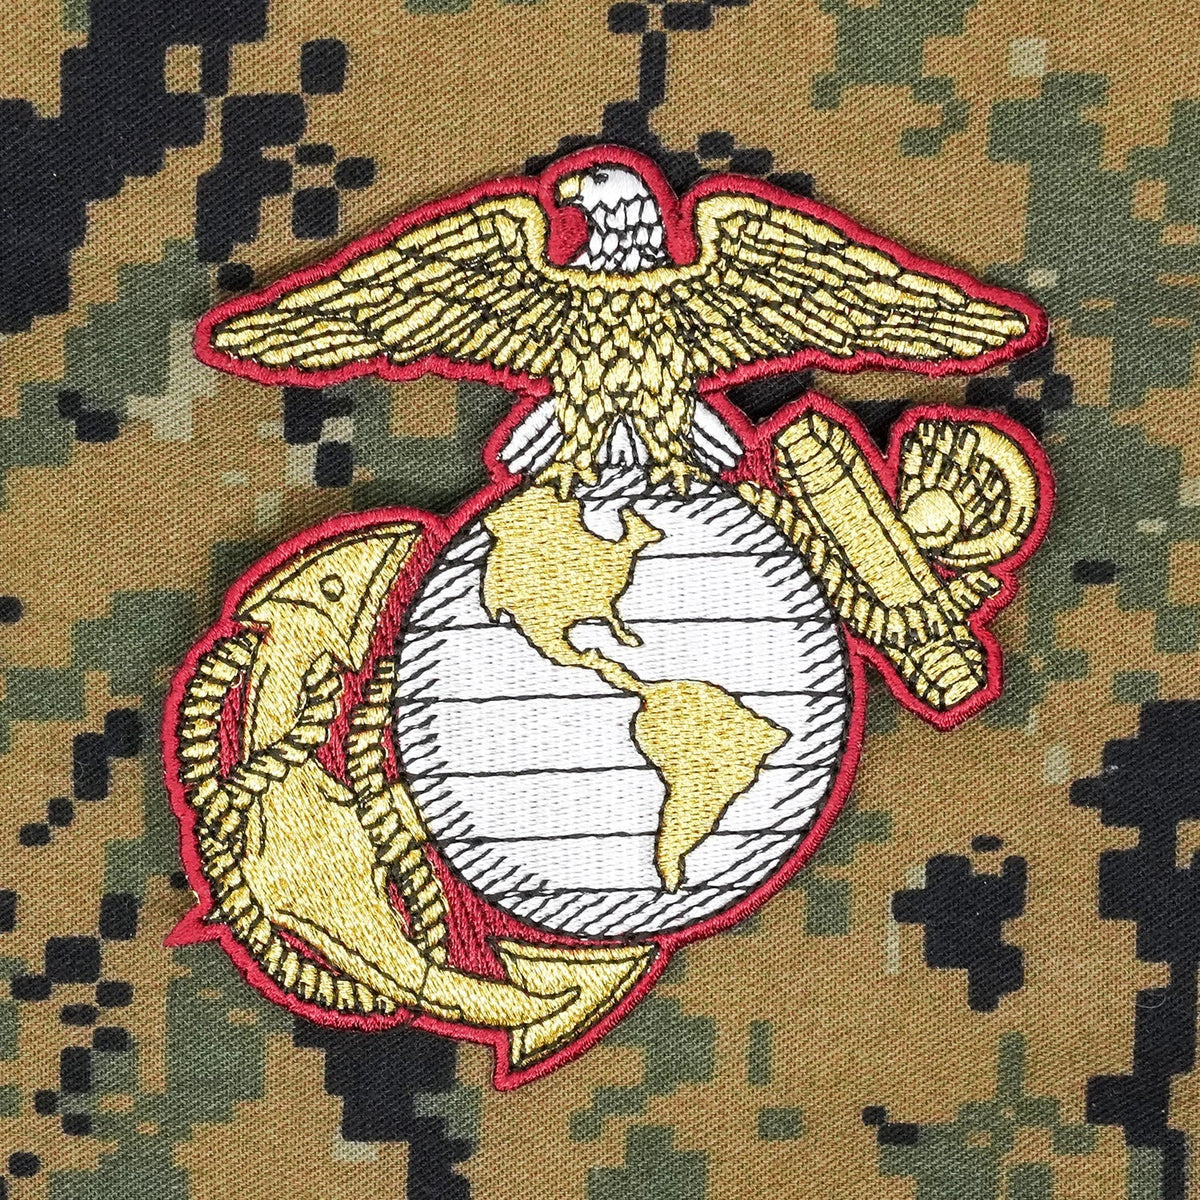 USMC Patch, 3.5 inch Marine Corps Eagle Globe and Anchor Ega Patch Made in USA